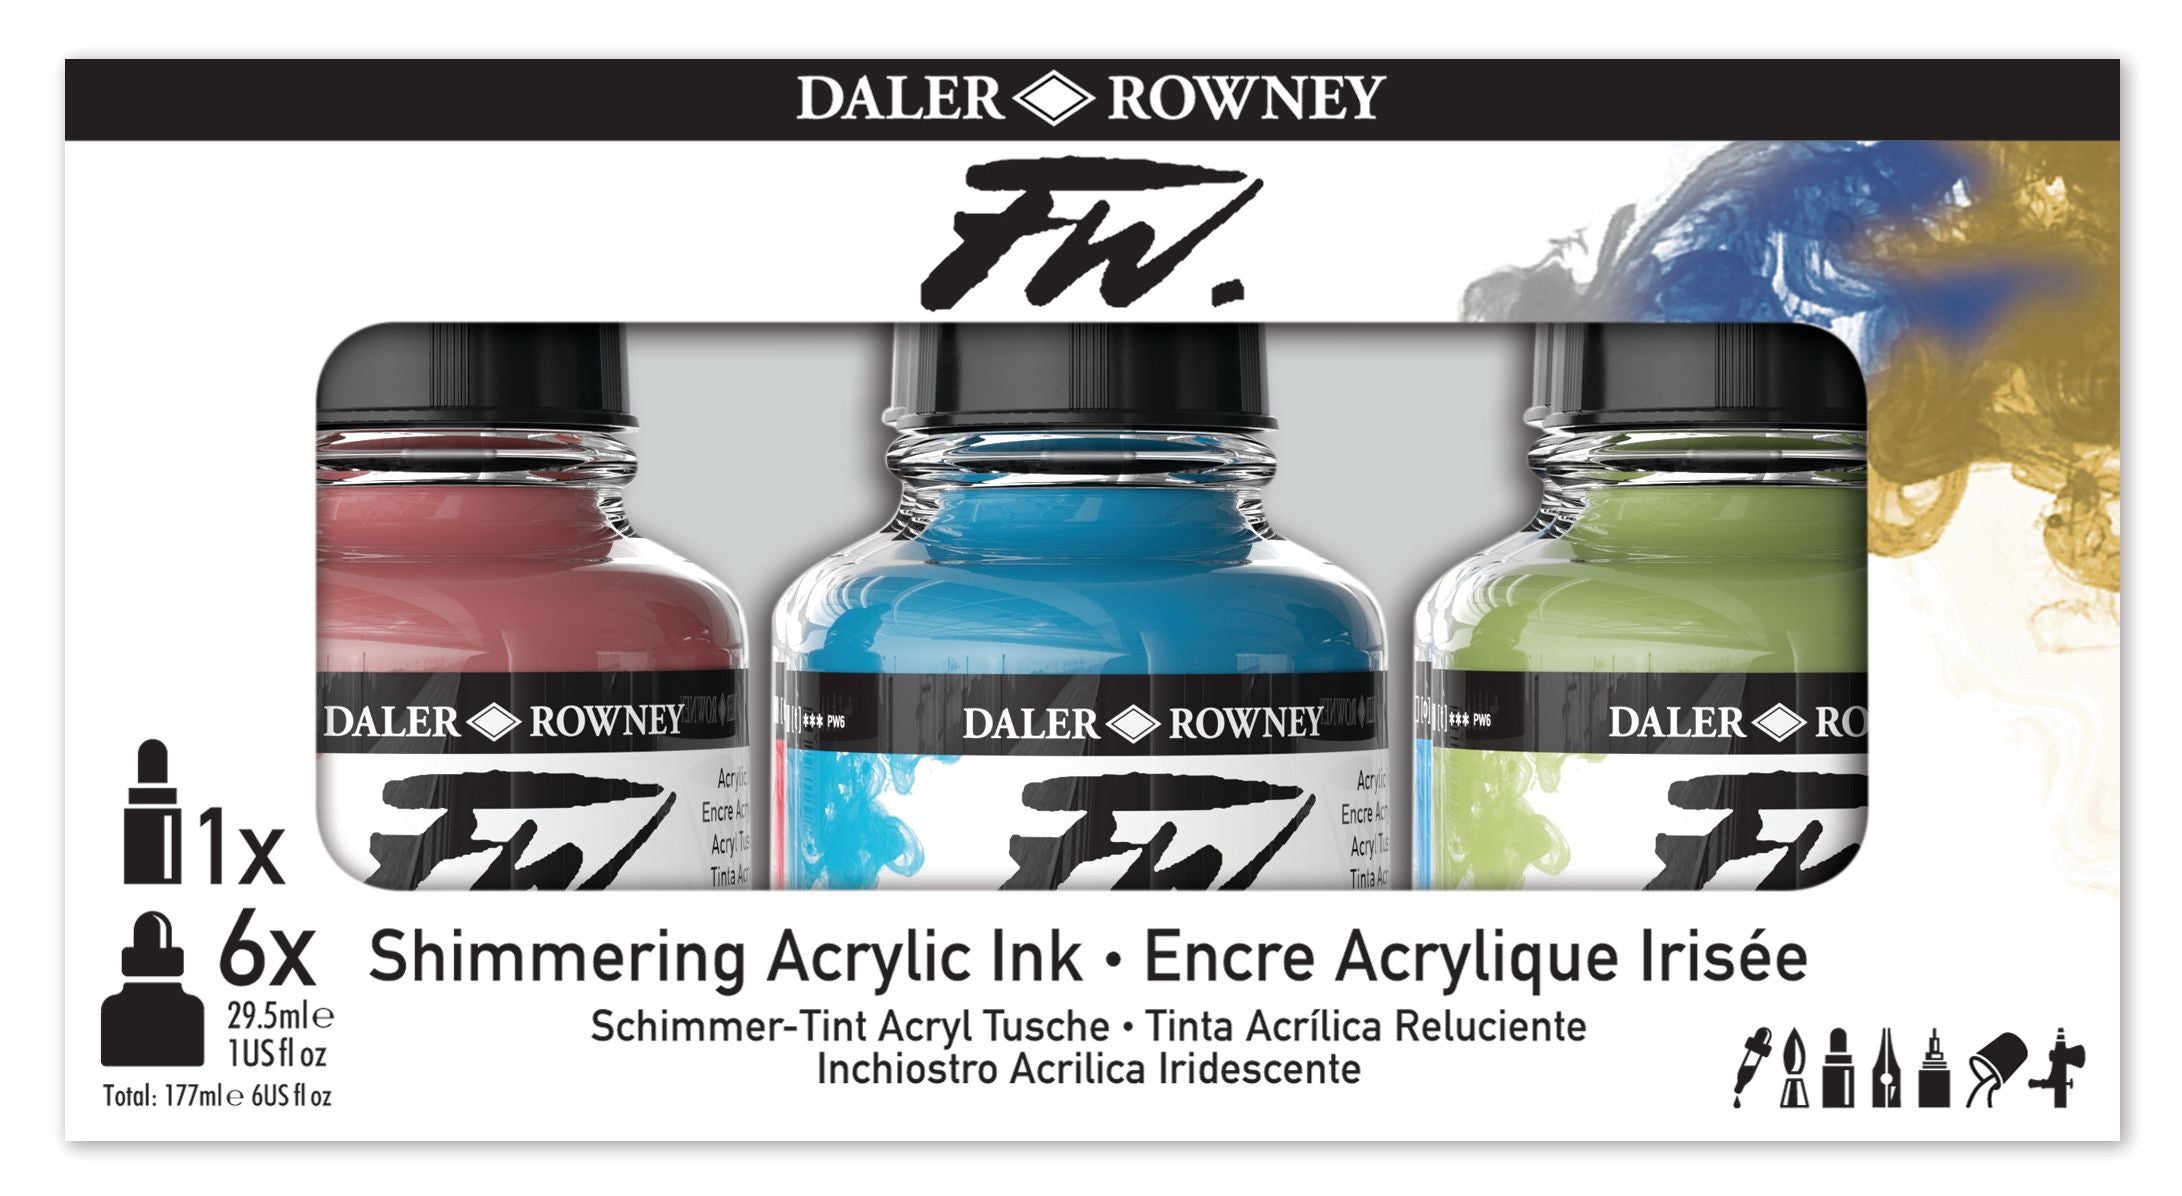 The Daler-Rowney FW Ink Shimmering  opalescent interference paints. Colours Set brings you six 29.5ml bottles of this acrylic-based ink in primary colours. Includes 6 x 29.5ml bottles of FW inks in a set. colours: 711, 713, 714, 709, 454, 028